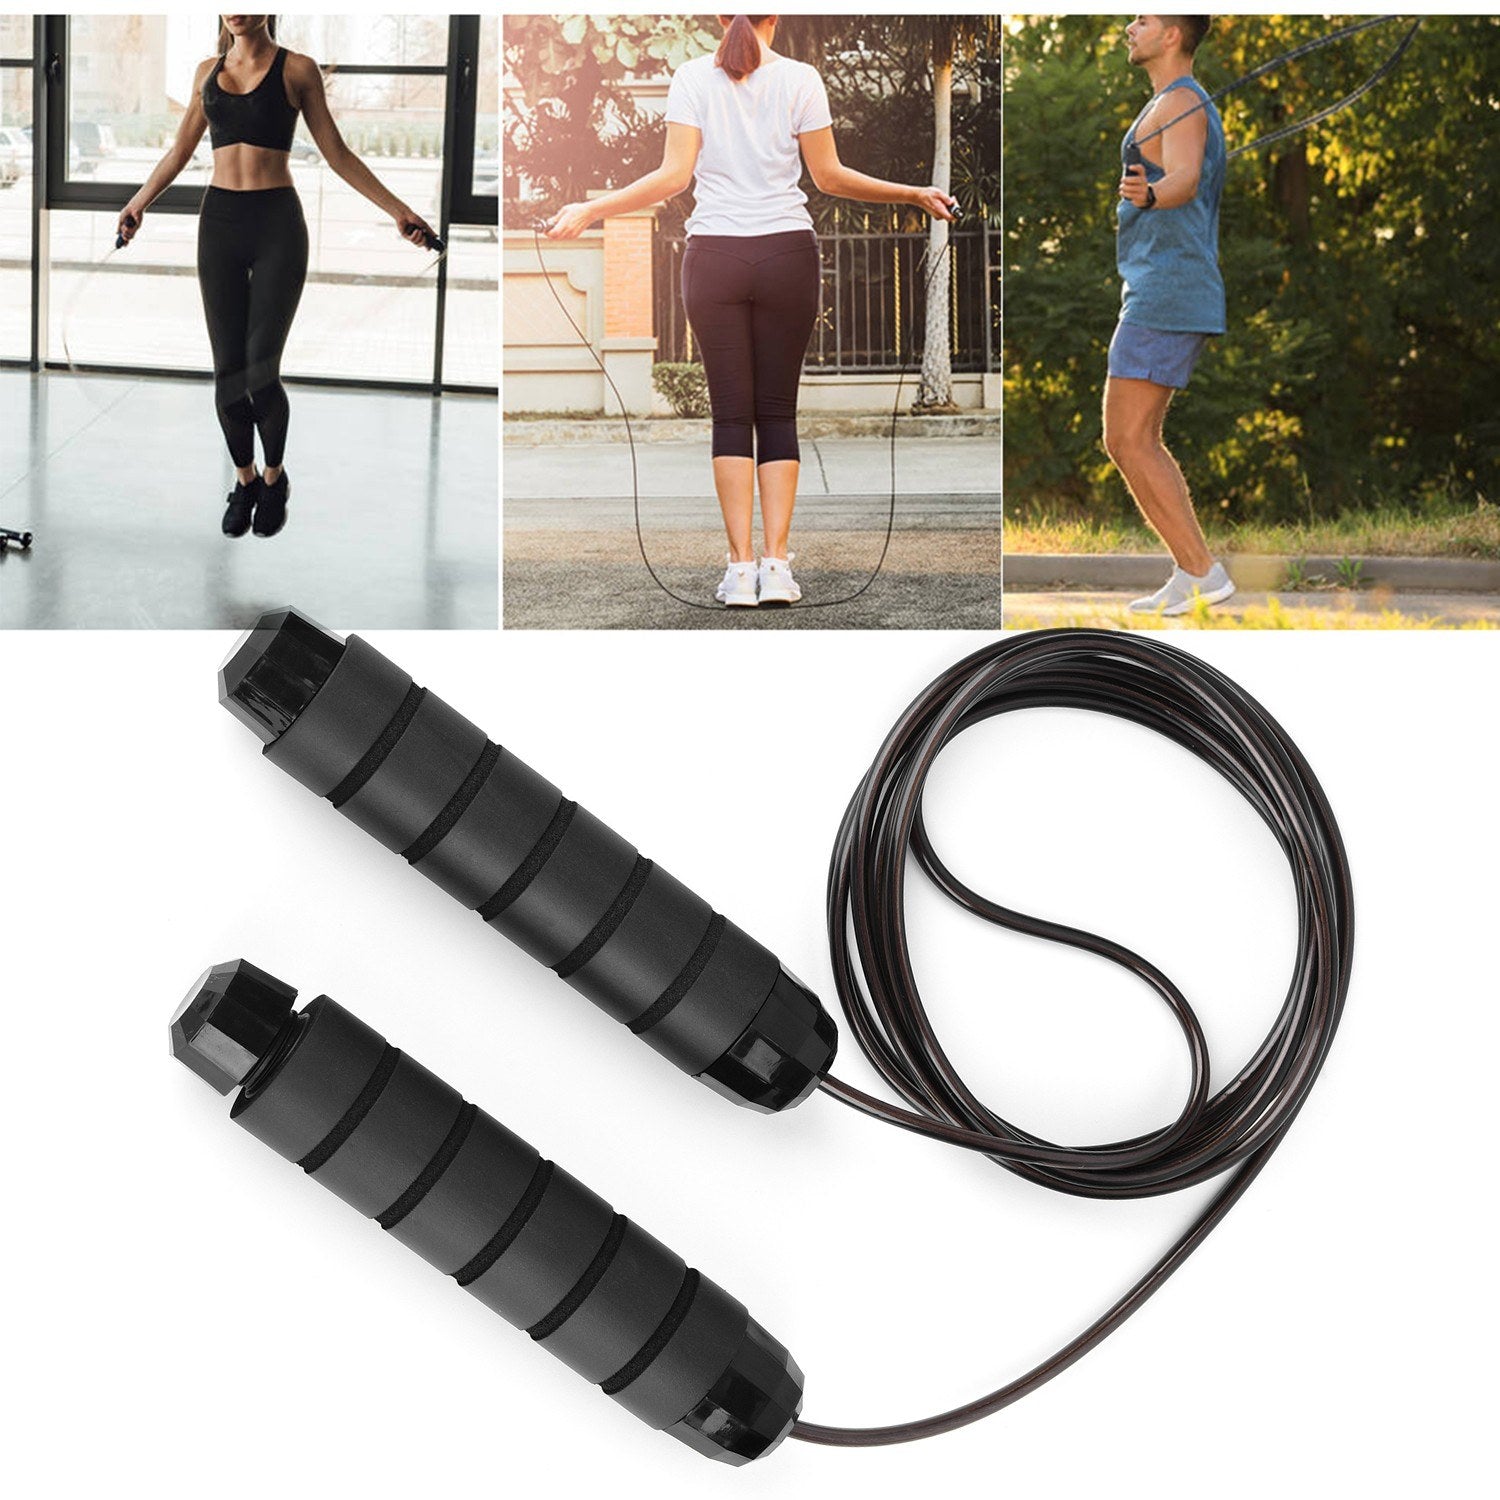 Abdominal Roller with Knee Pad Adjustable Jump Rope for Home Office Gym Fitness Workout Exercise